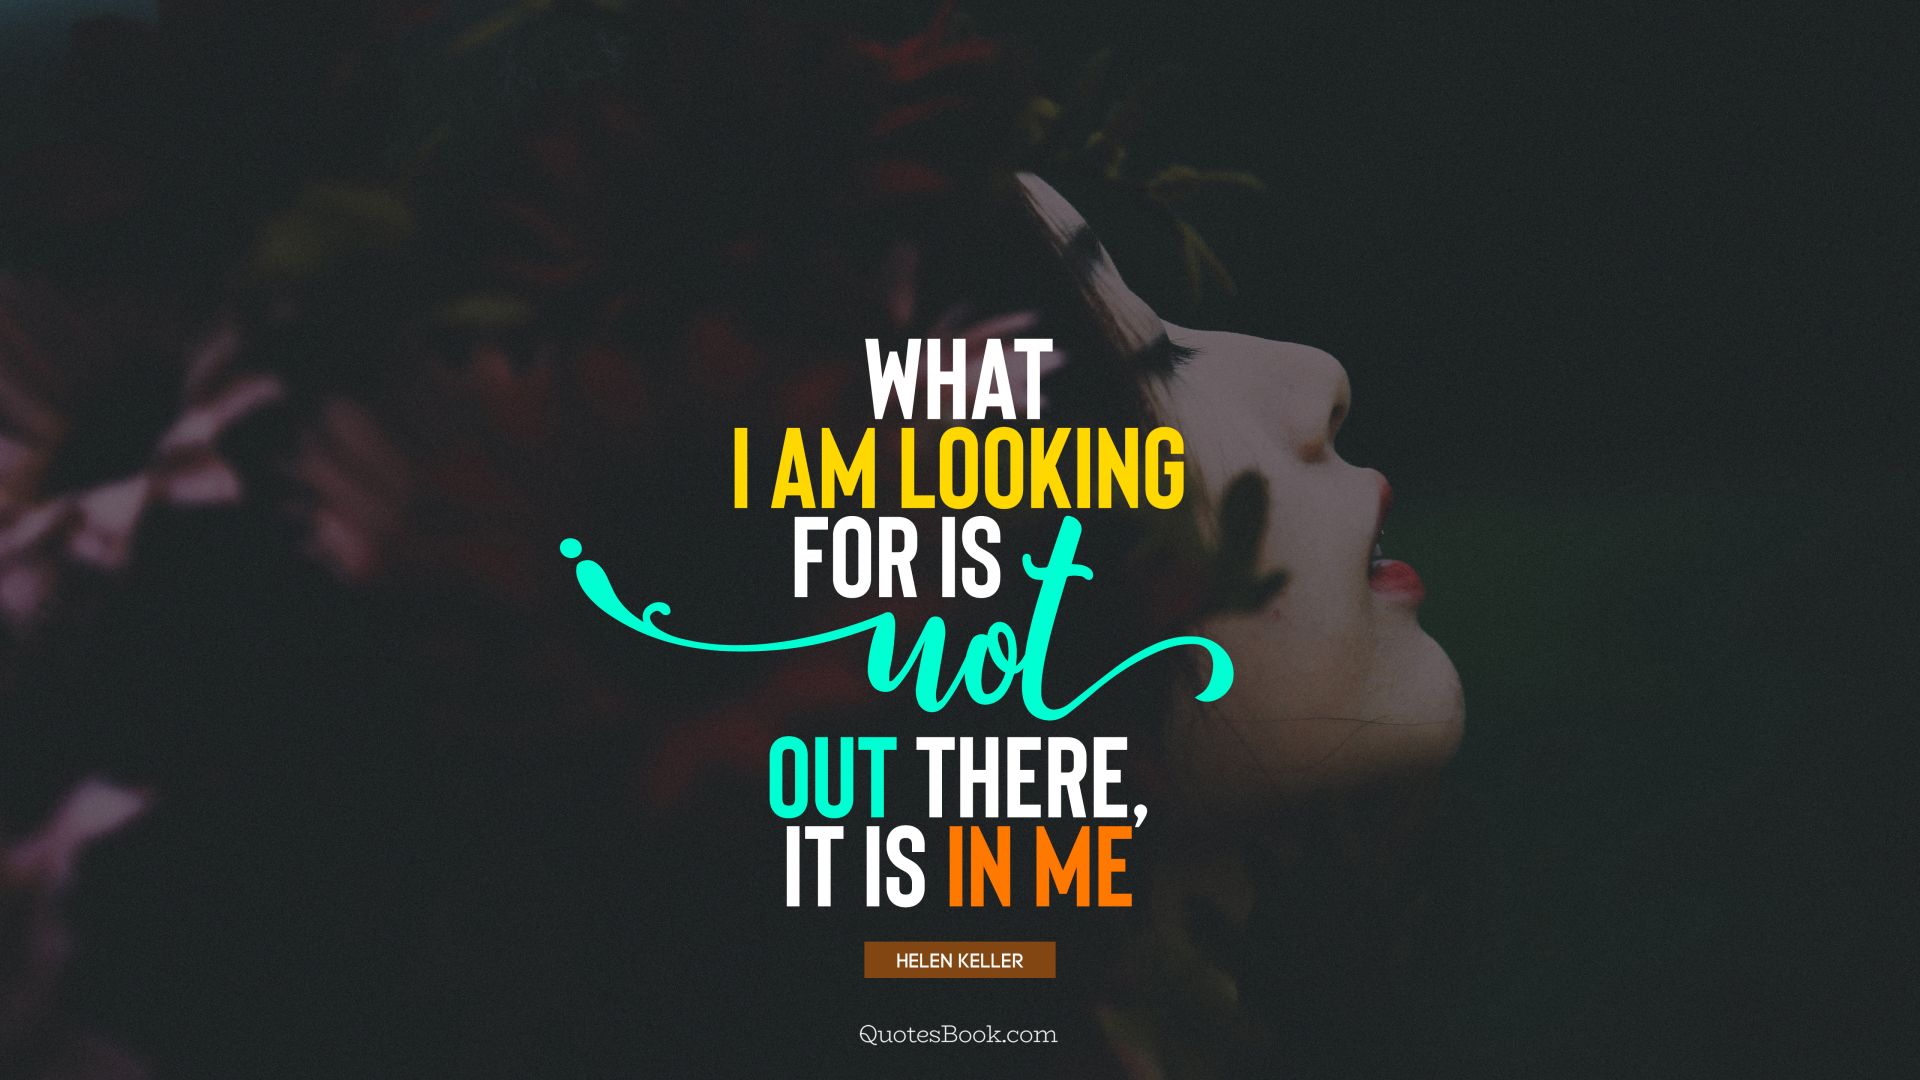 What I am looking for is not out there, it is in me. - Quote by Helen Keller